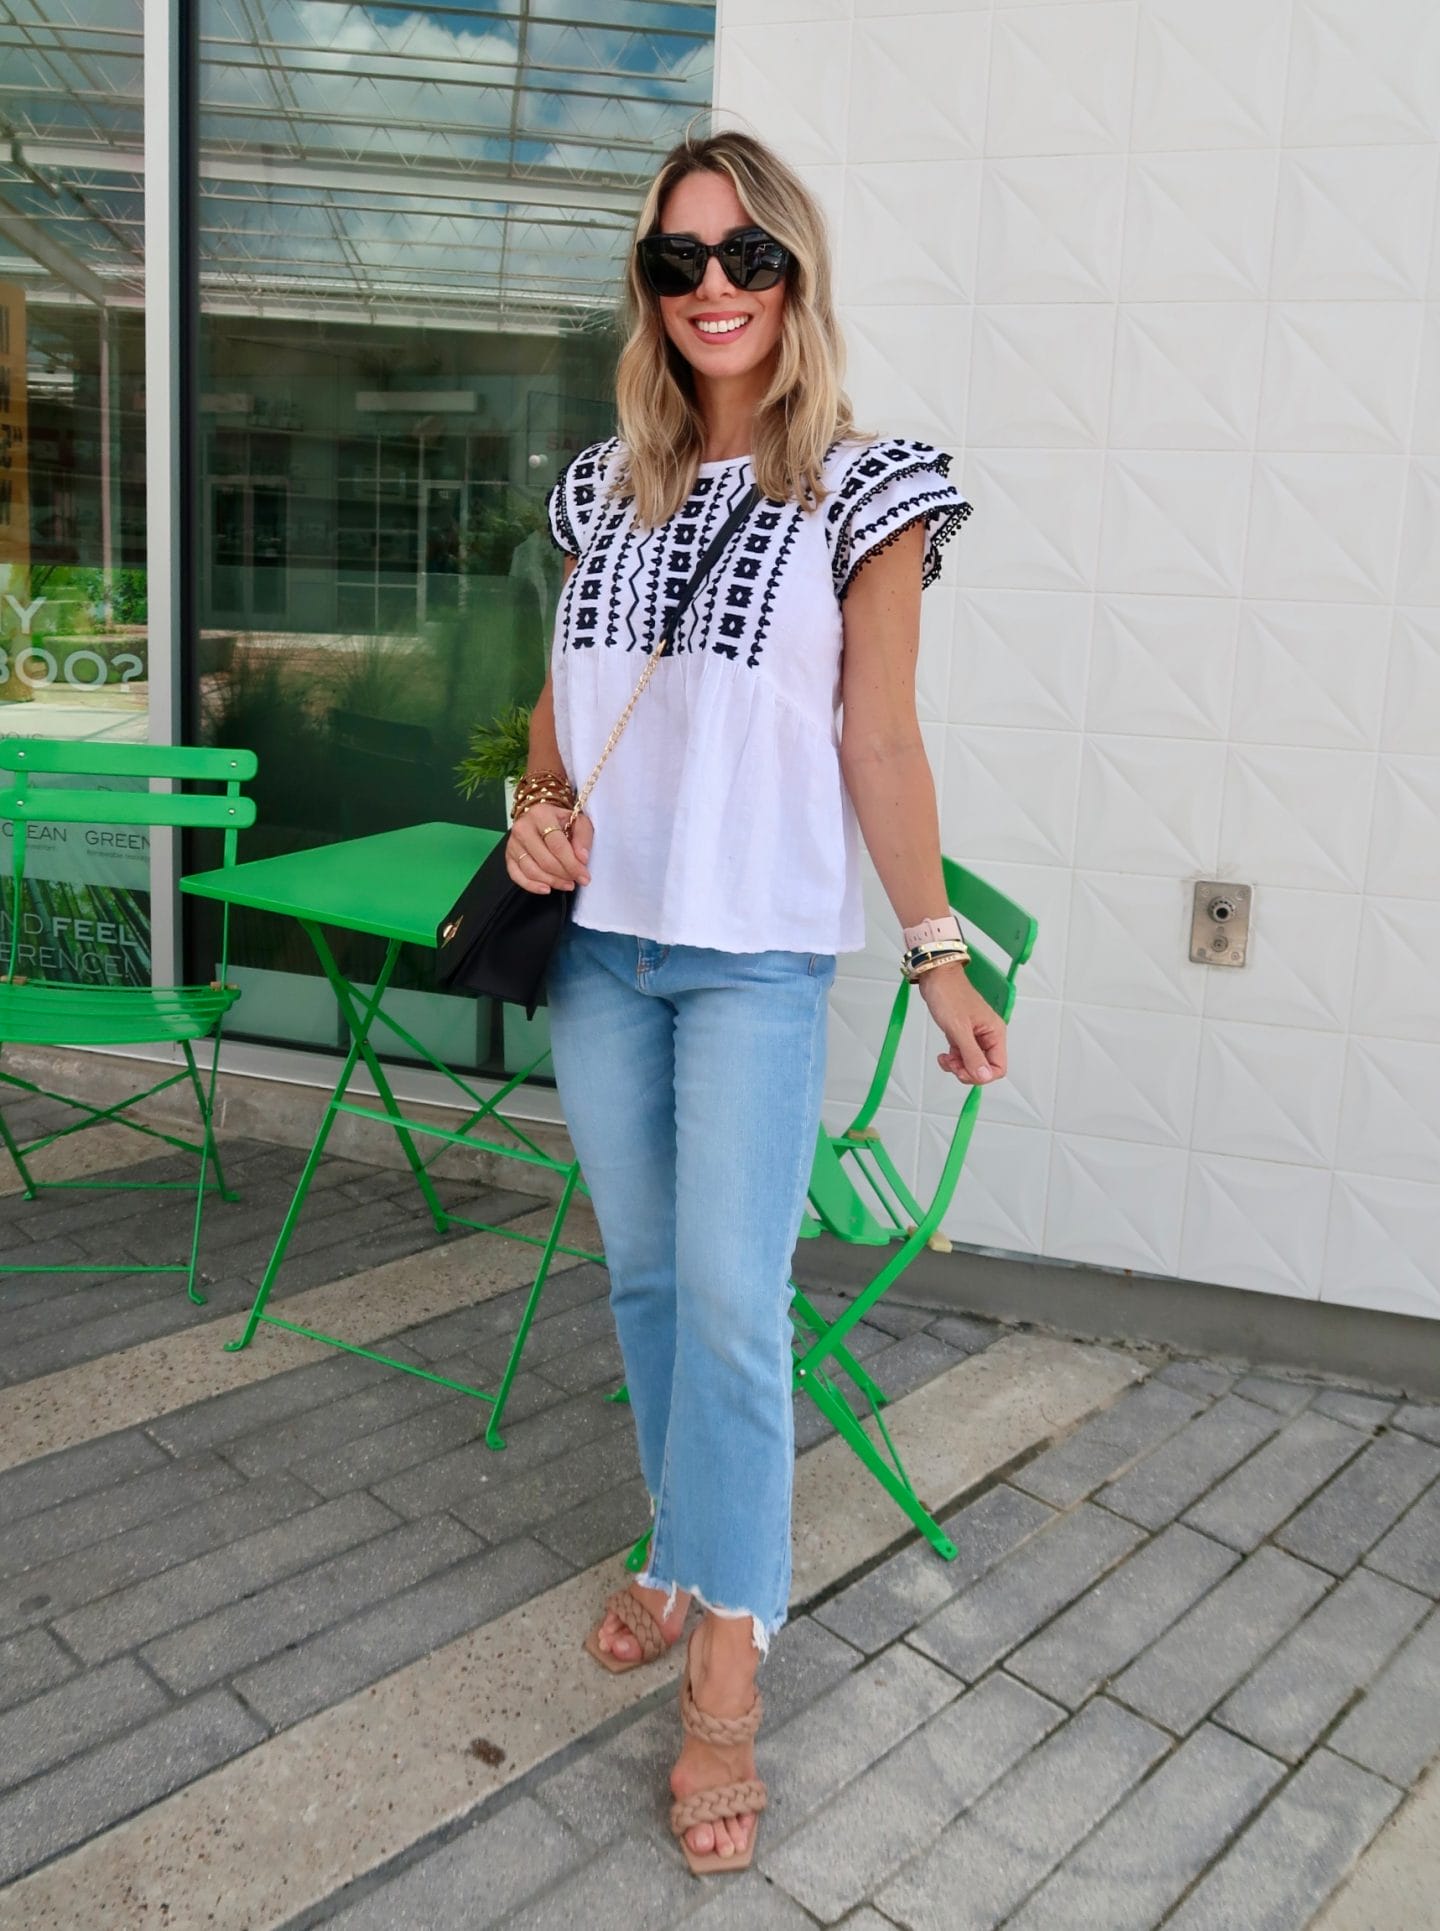 Outfits Lately, Embroidered Top, Jeans, Sandals, Crossbody 